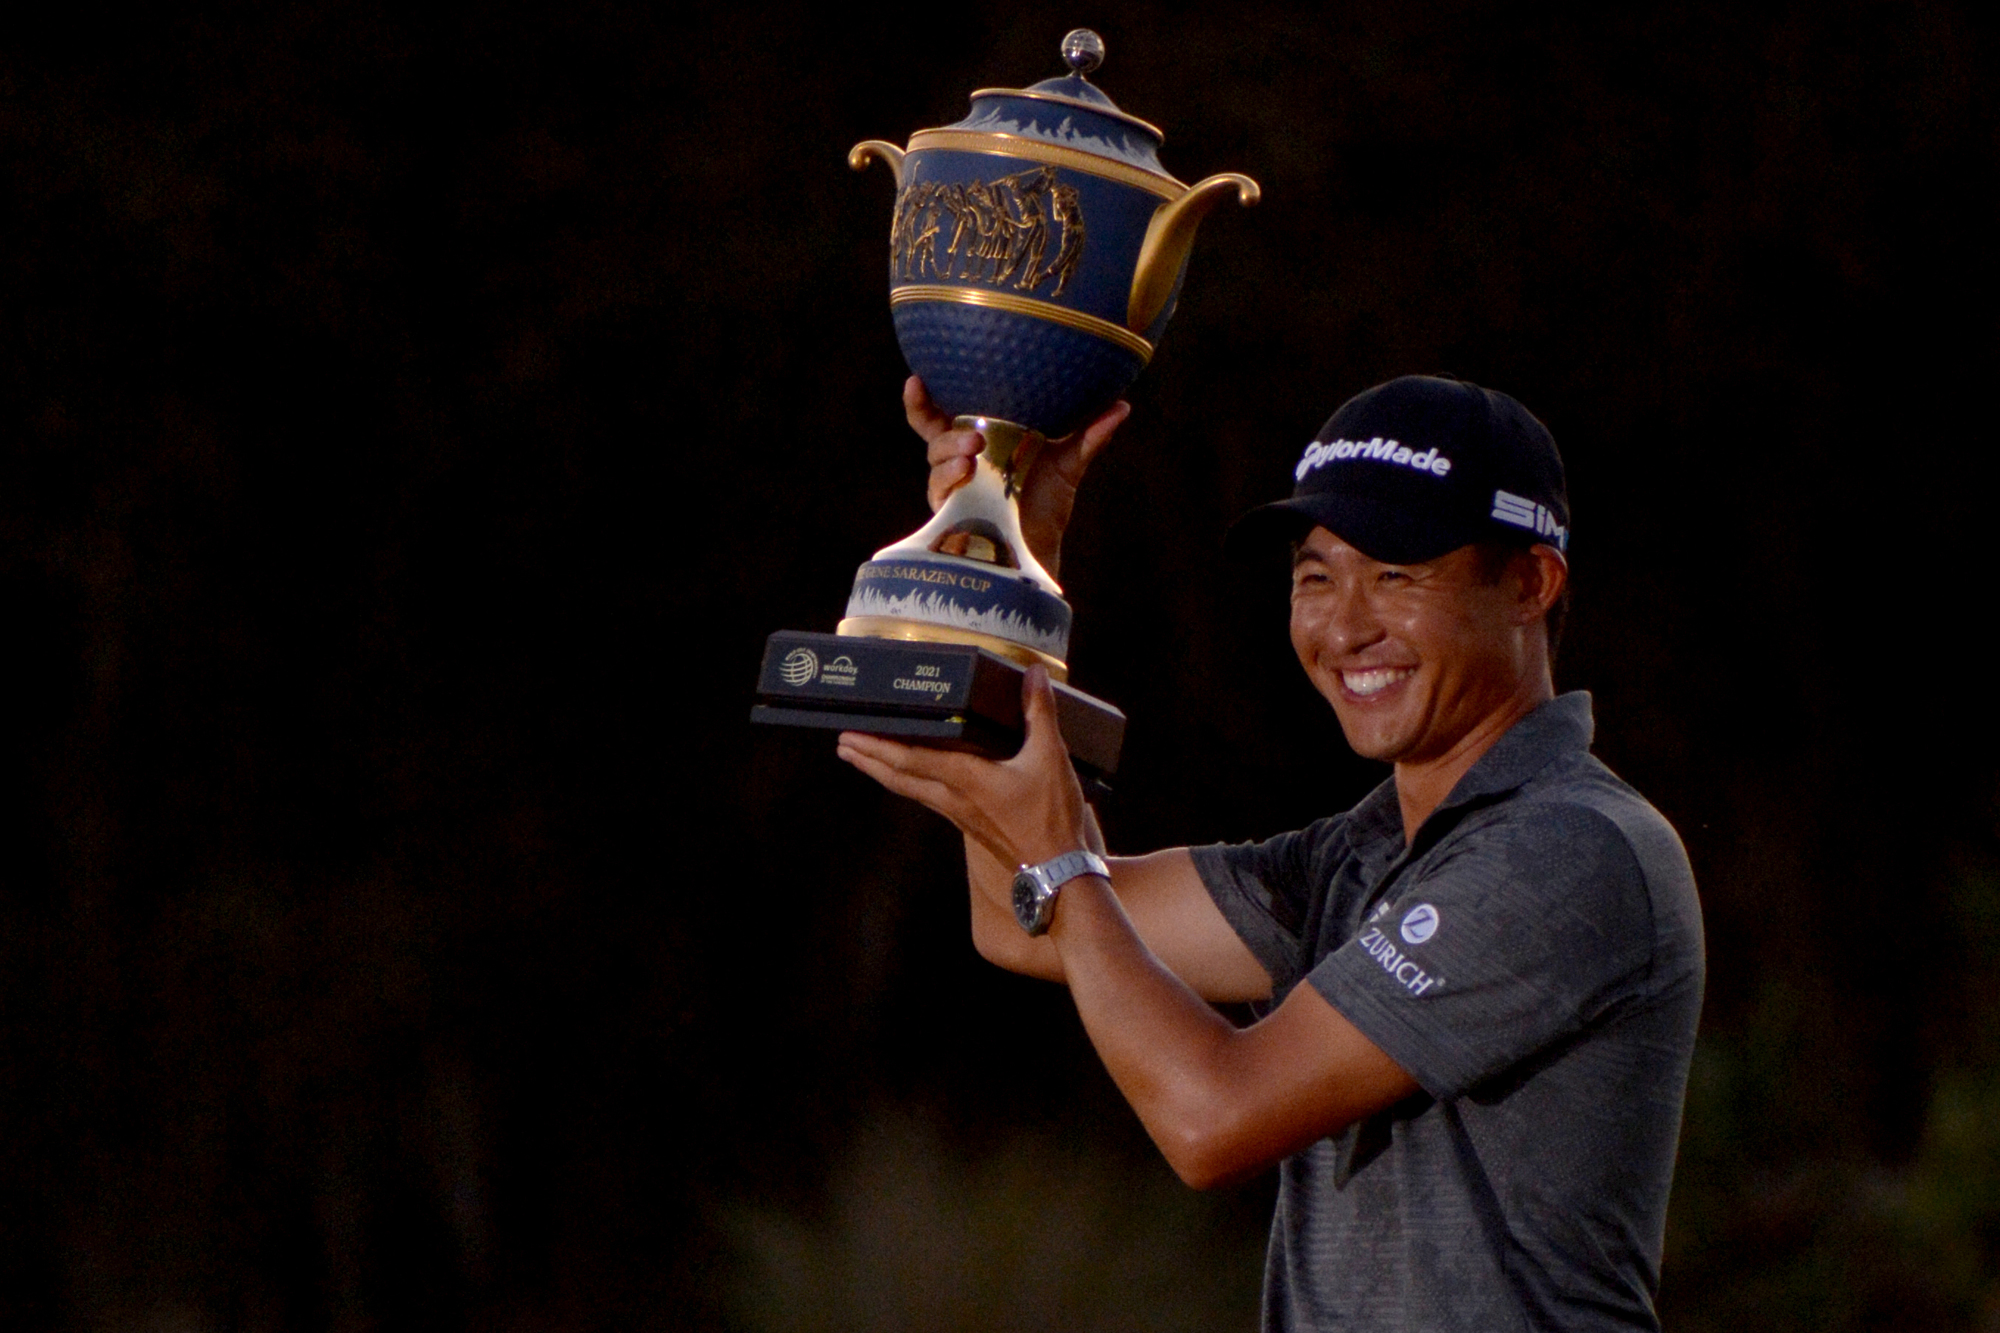 2. Collin Morikawa shot 18 under par to win the World Golf Championships-Workday Championship at The Concession.